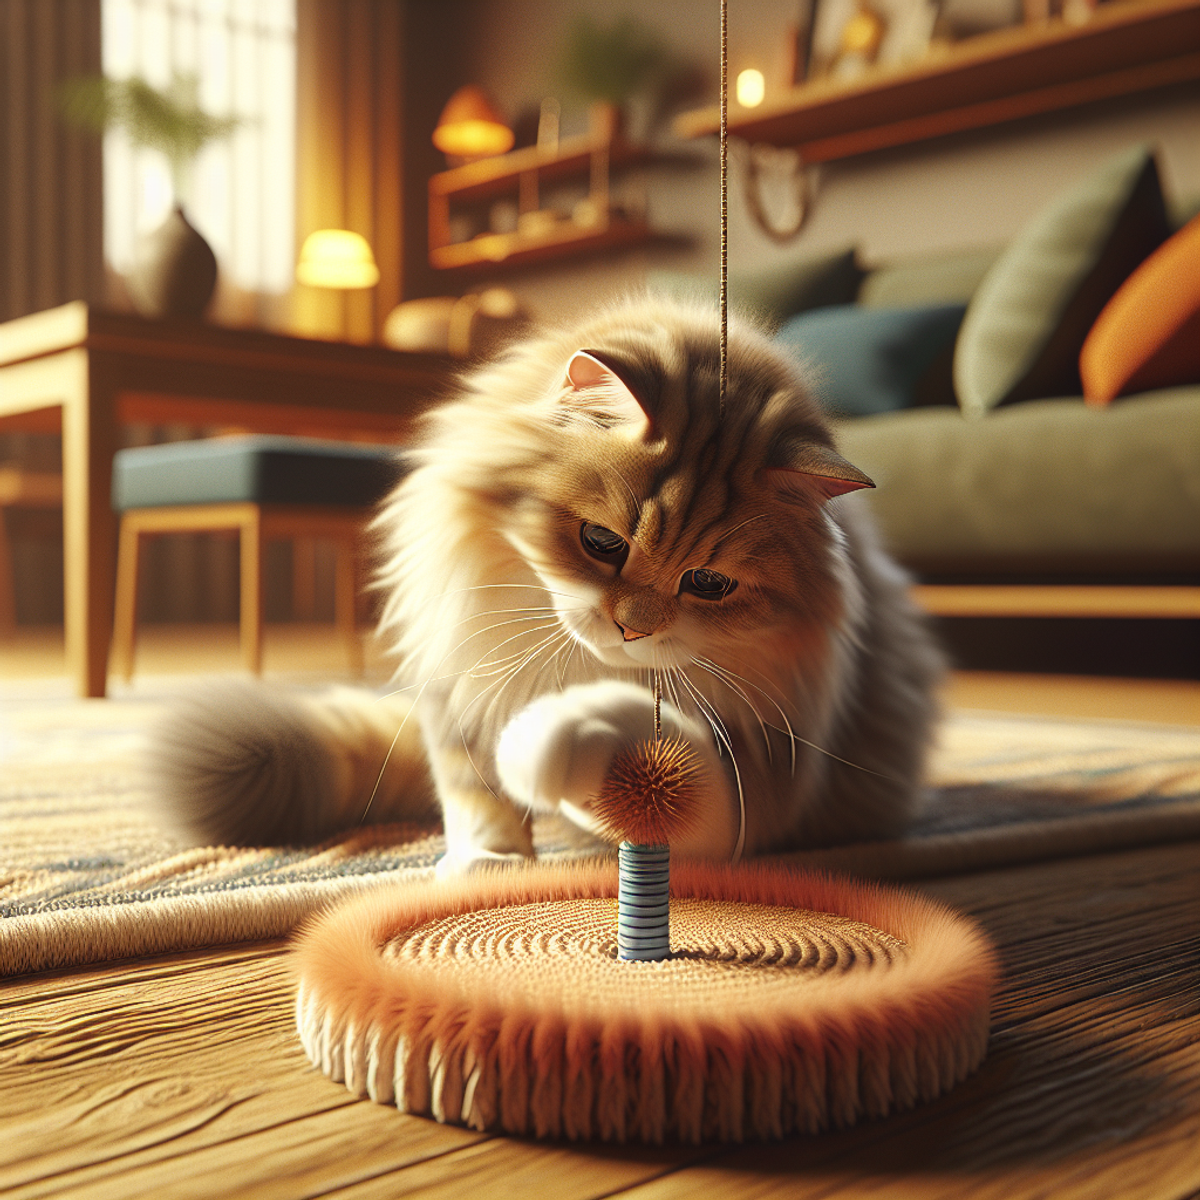 A senior cat with fluffy fur playing with a specially designed toy in a cozy home setting.